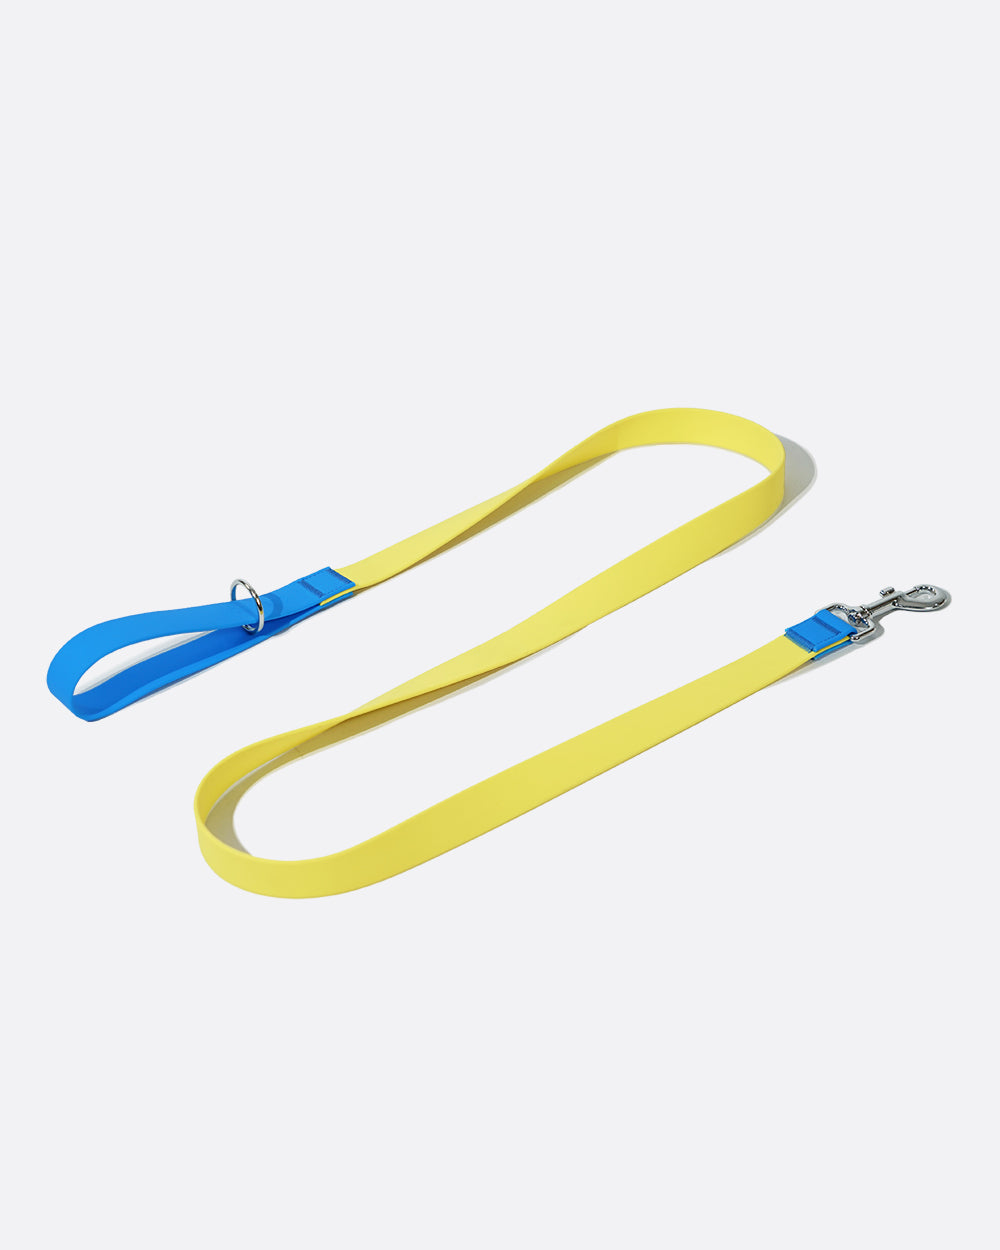 This leash is perfect for sunny adventures with your furry friend. Its waterproof PVC material ensures durability and easy maintenance, making it ideal for beach strolls or park outings